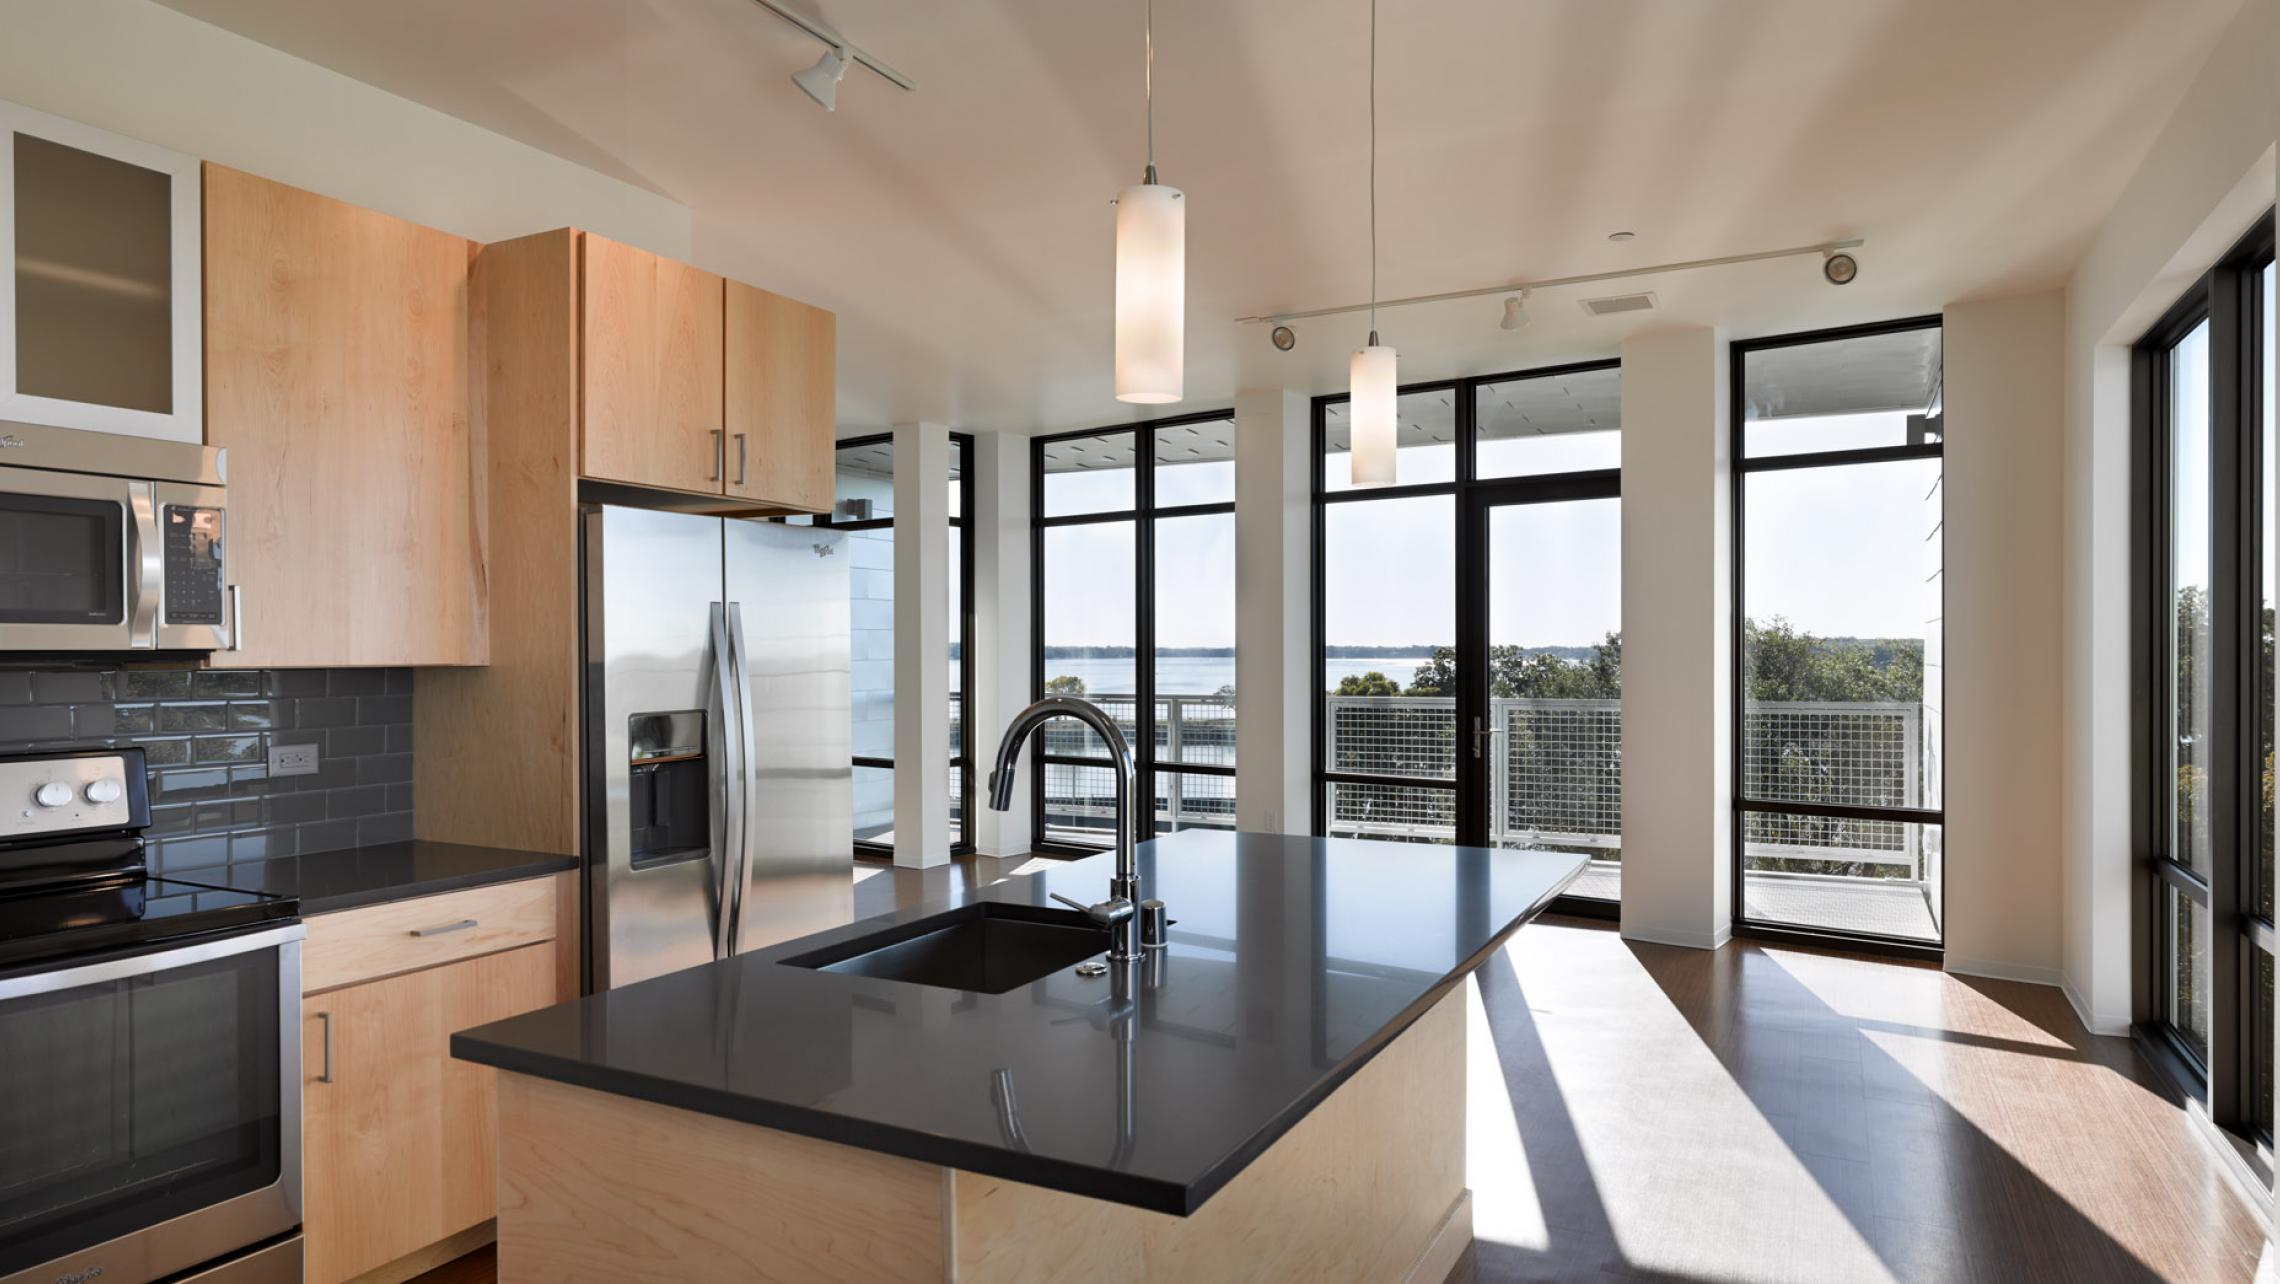 ULI Seven27 Apartments - Kitchen with a lake view and natural light